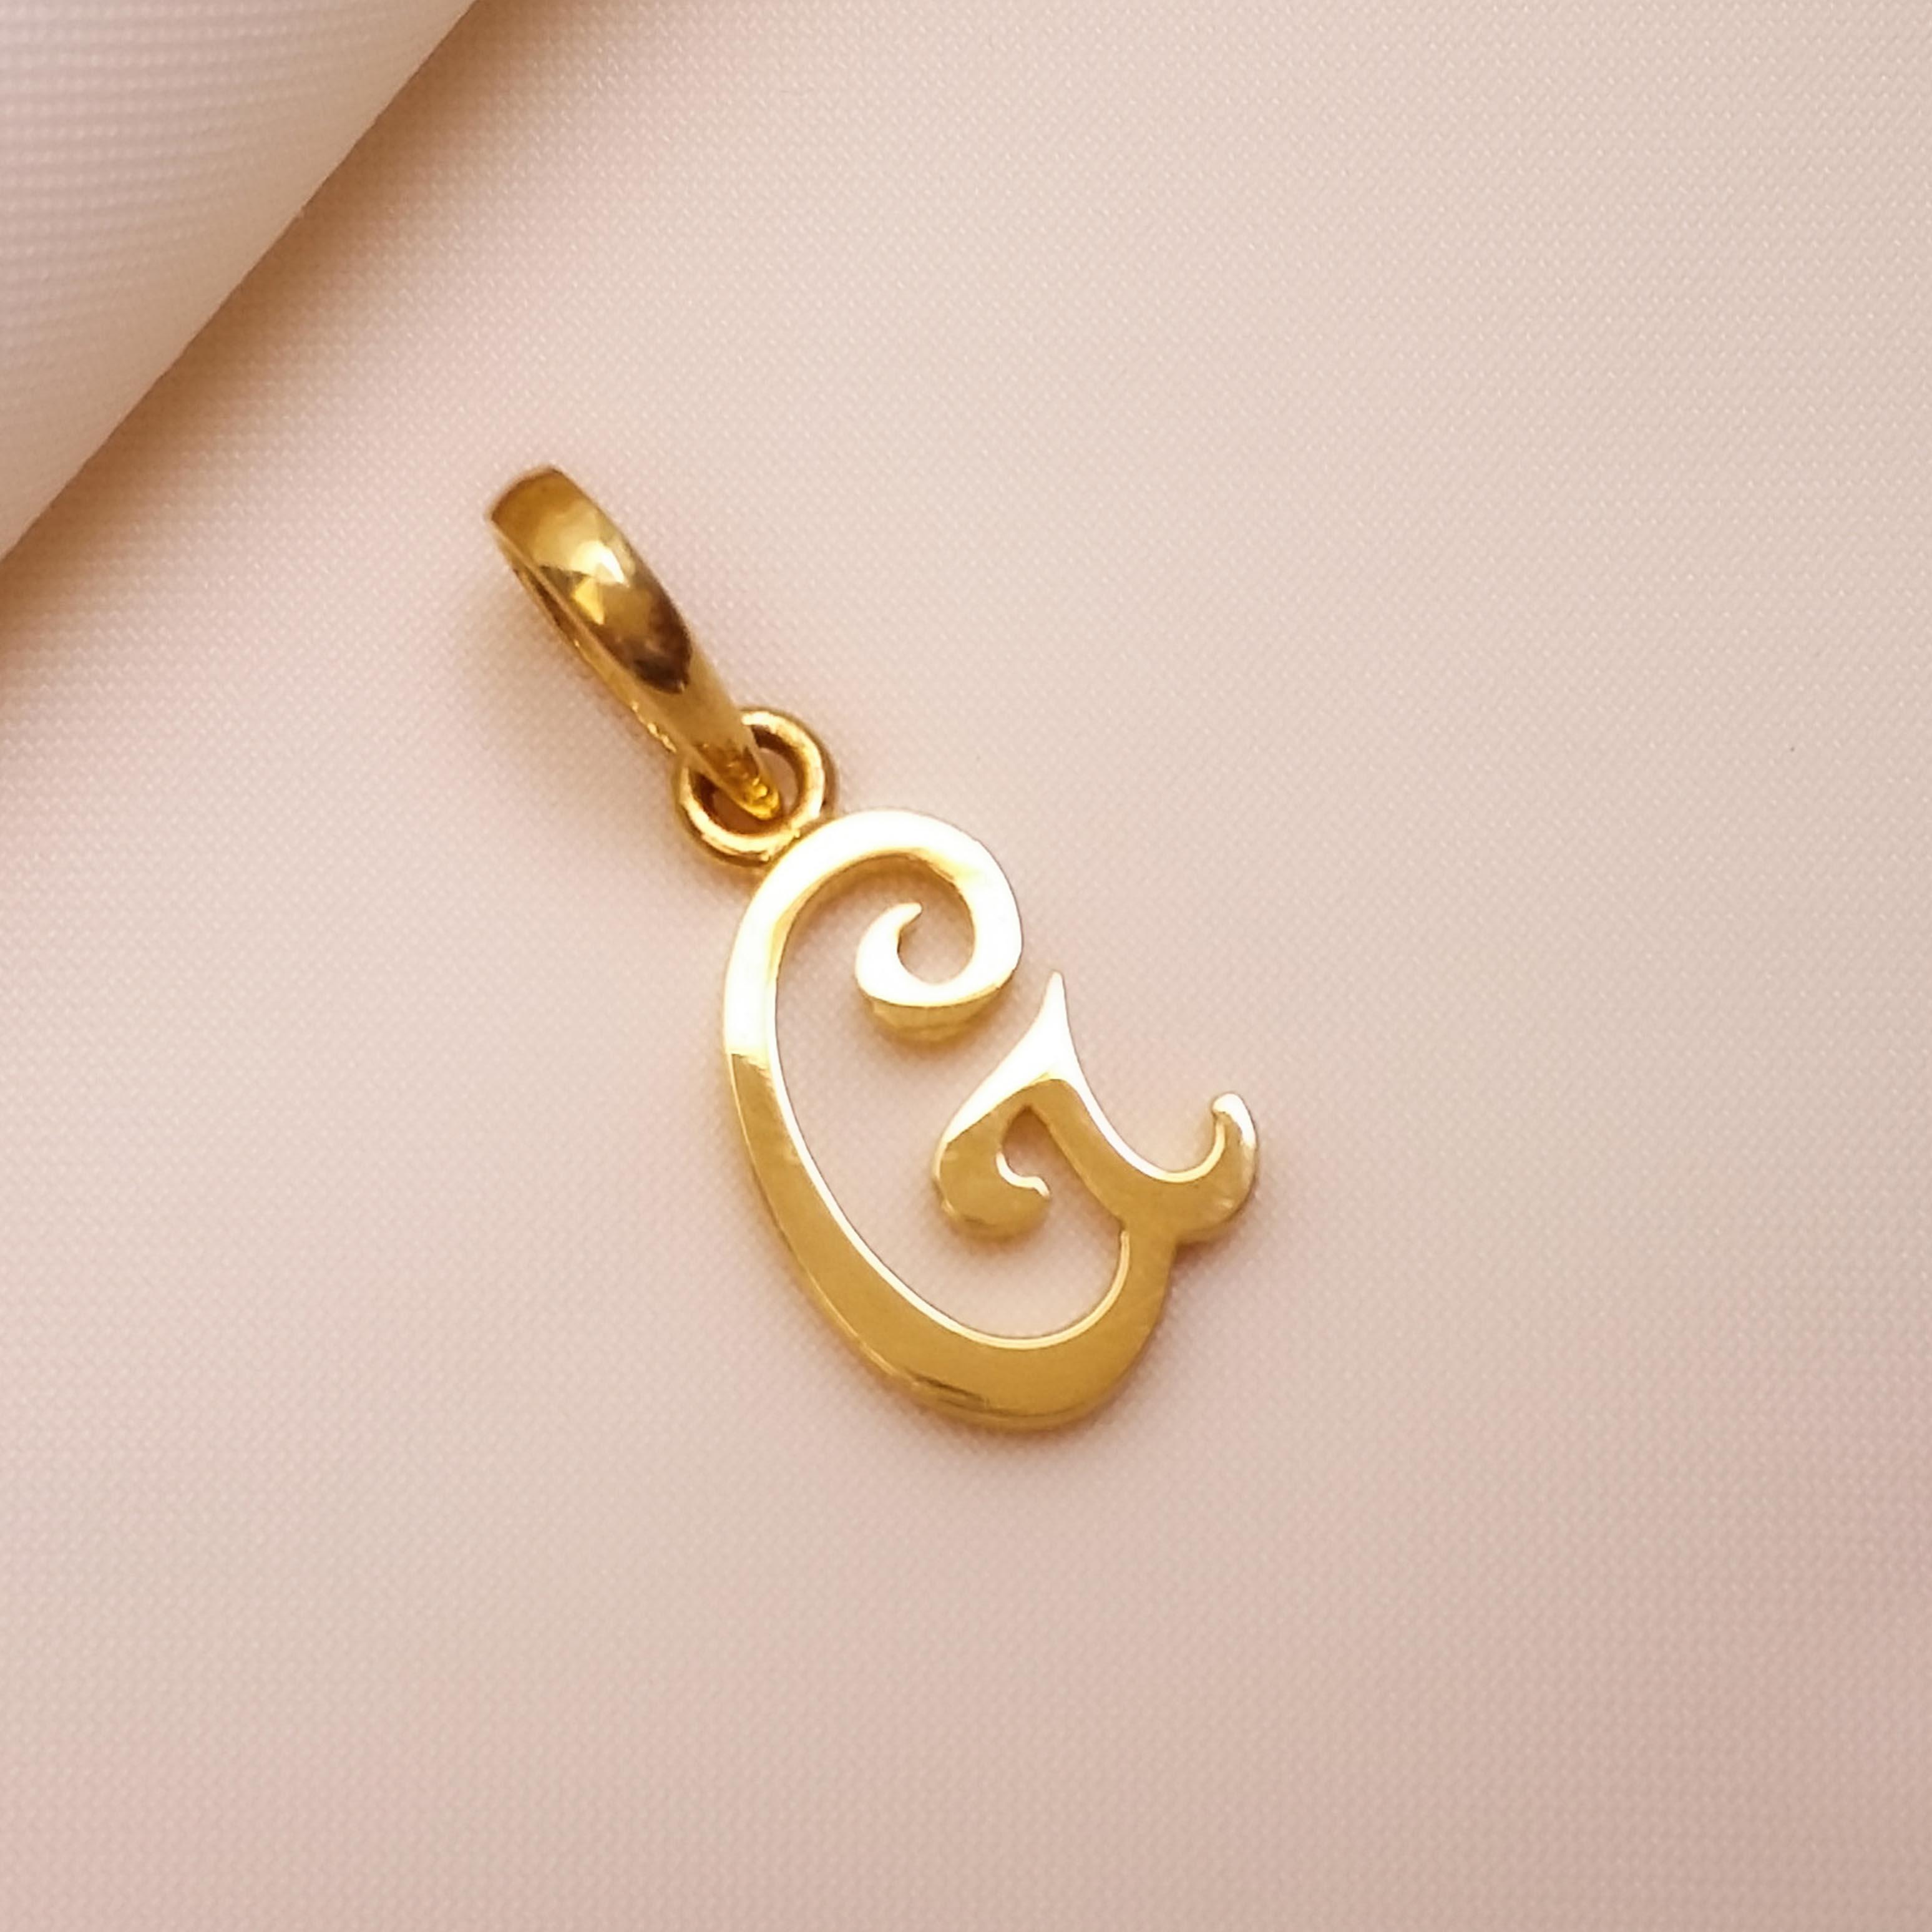 Buy G Glorious Gold Letter Pendant 22 KT yellow gold (1.46 gm). | Online By Giriraj Jewellers